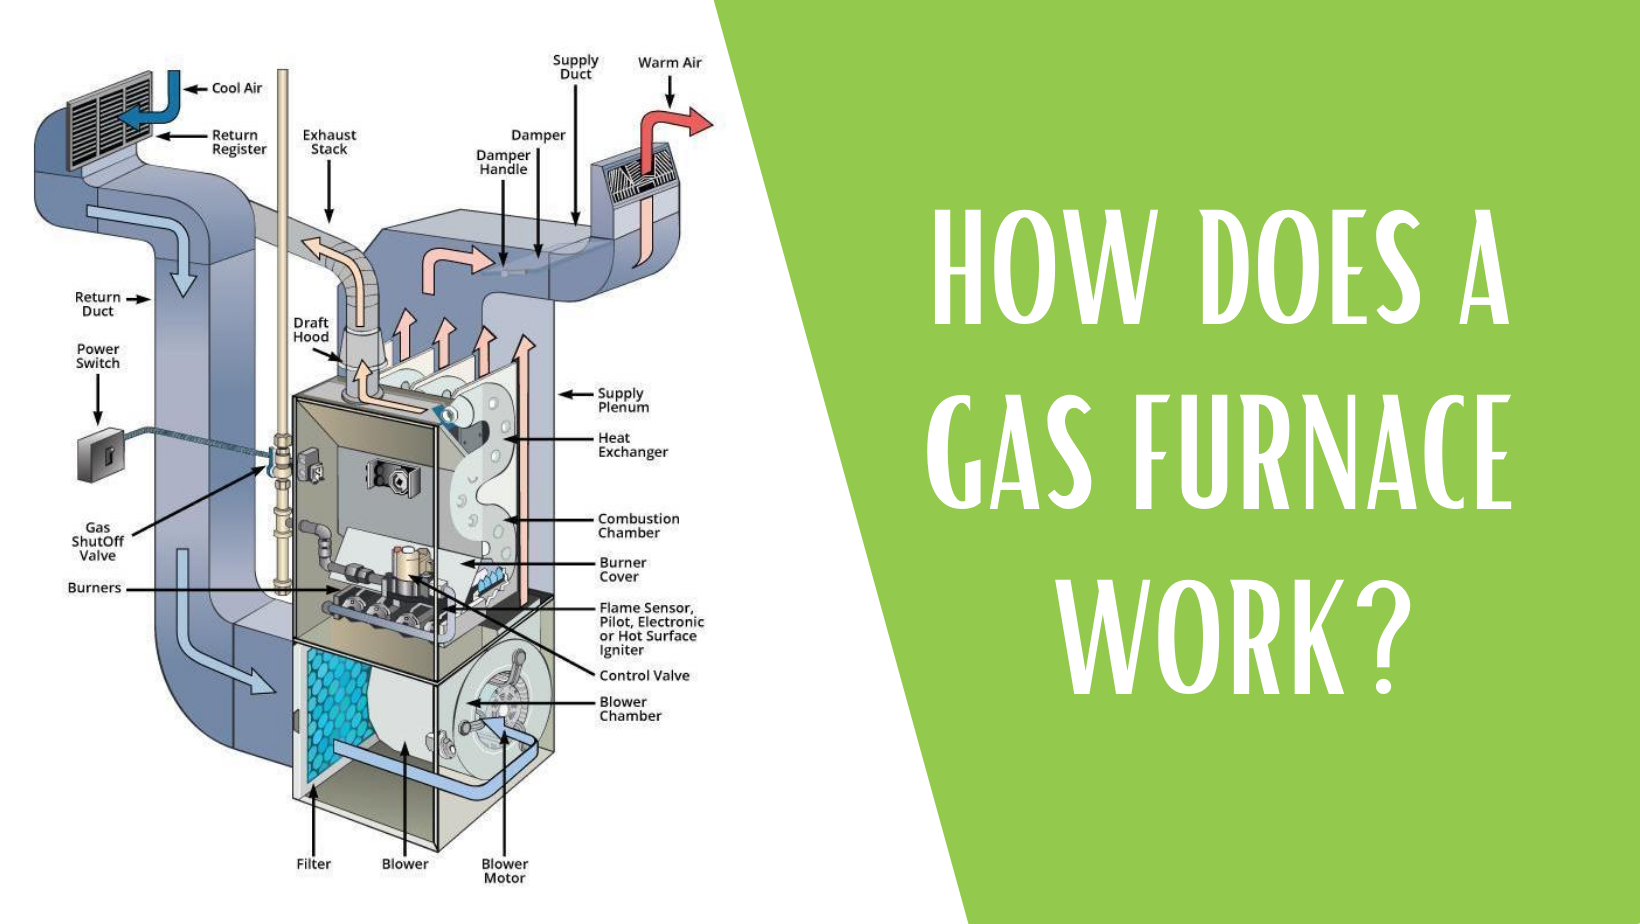 How does a gas furnace work?